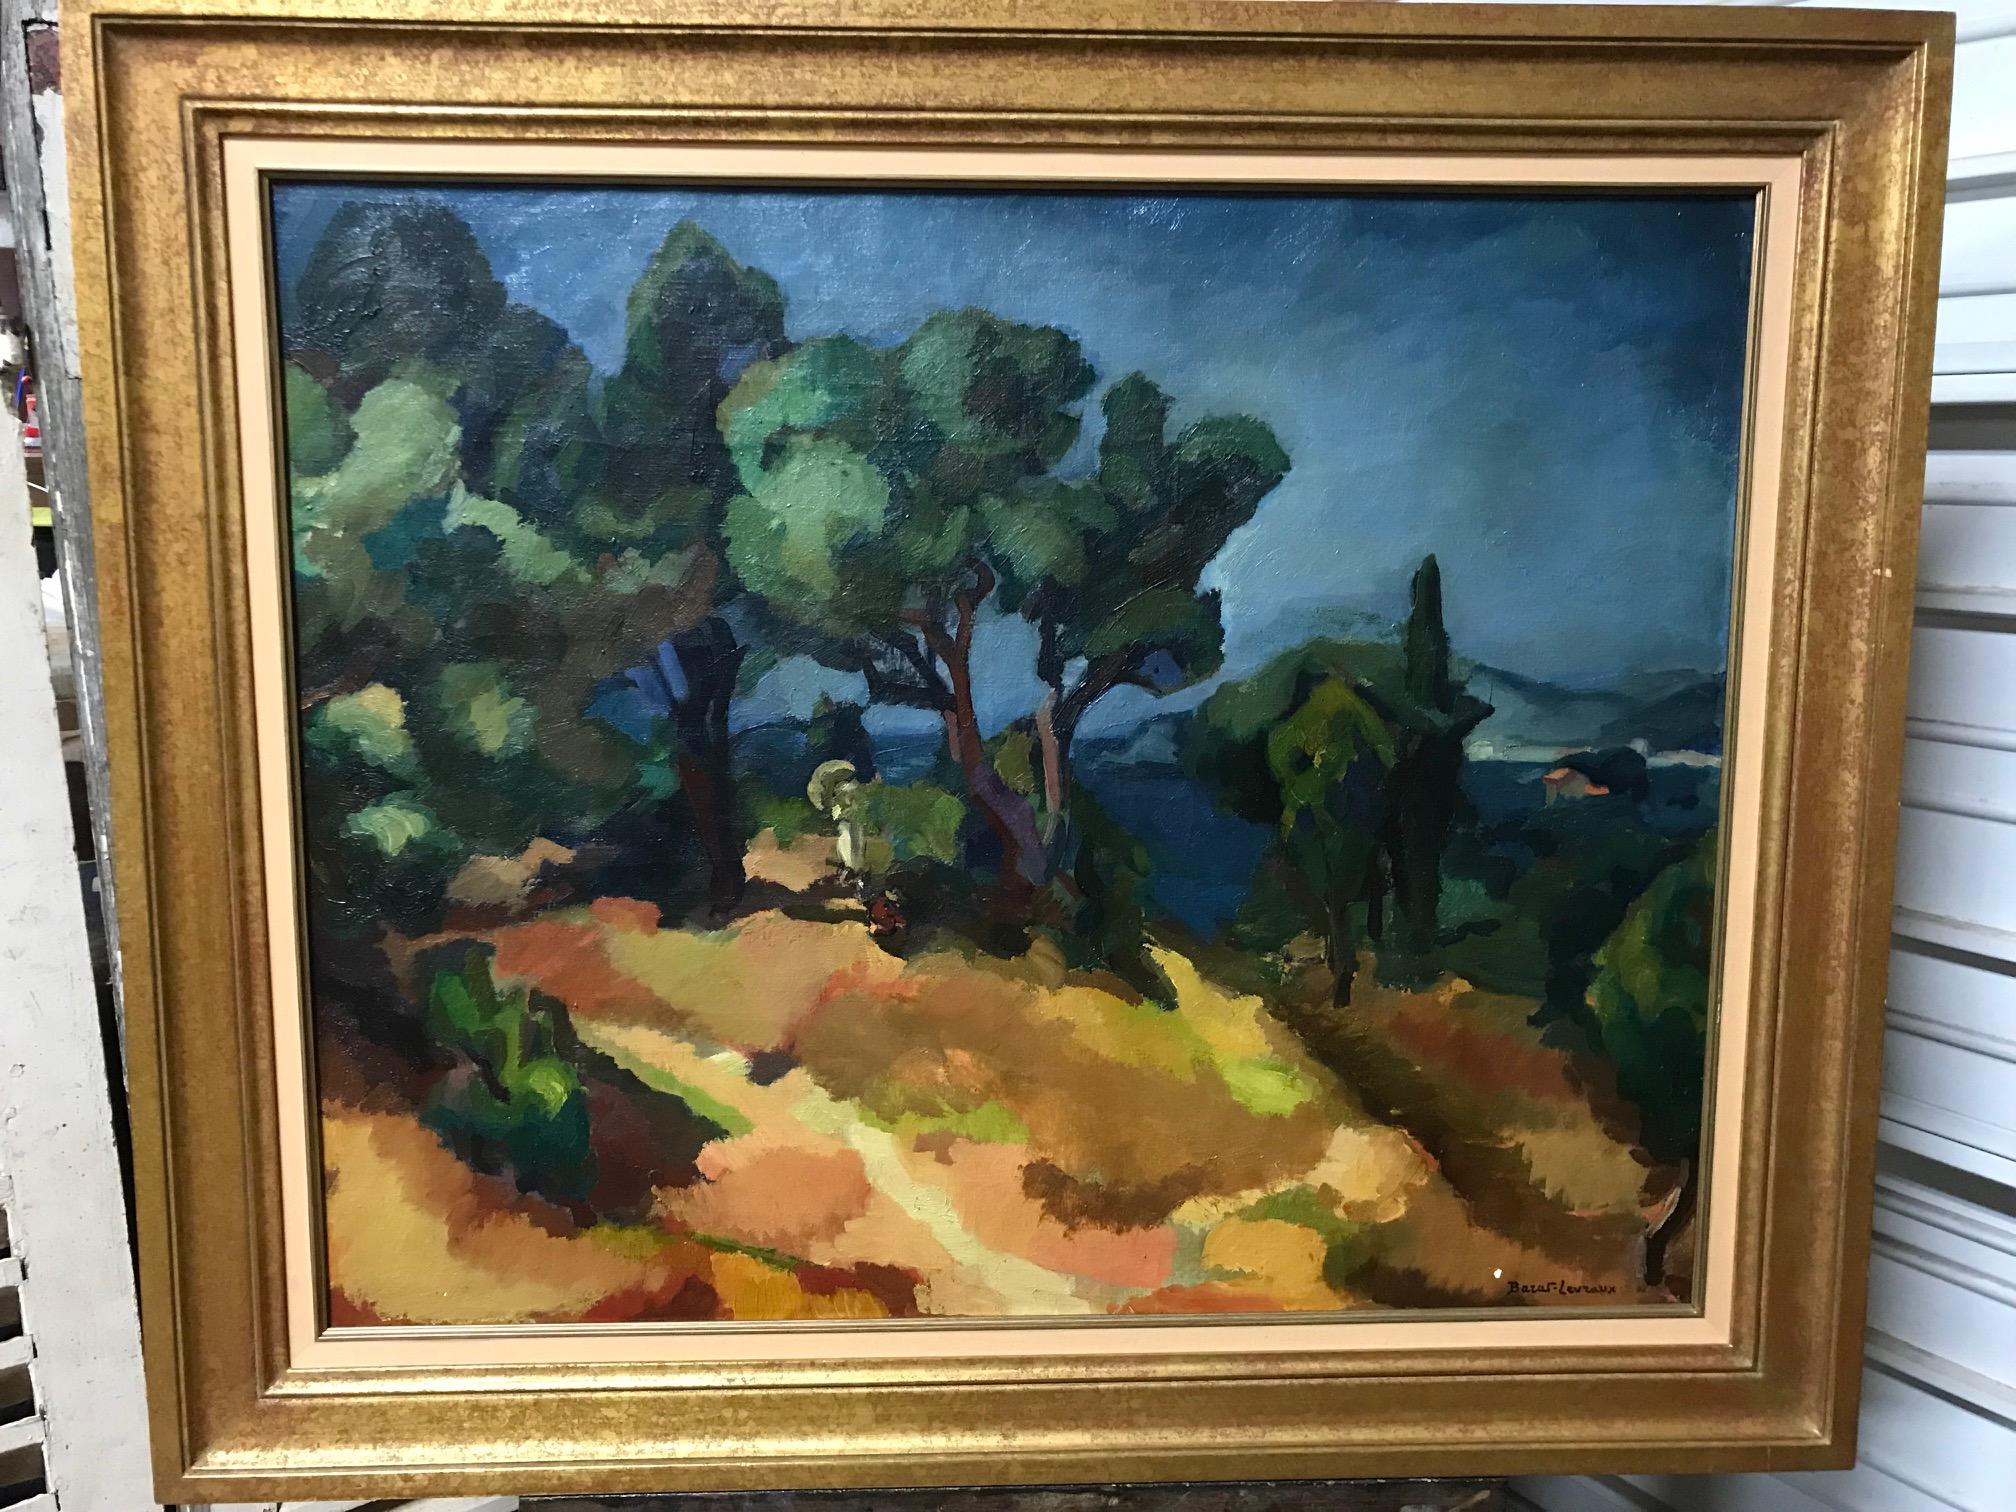 French Early 20th Century Oil on Canvas In Good Condition For Sale In Stockbridge, GA